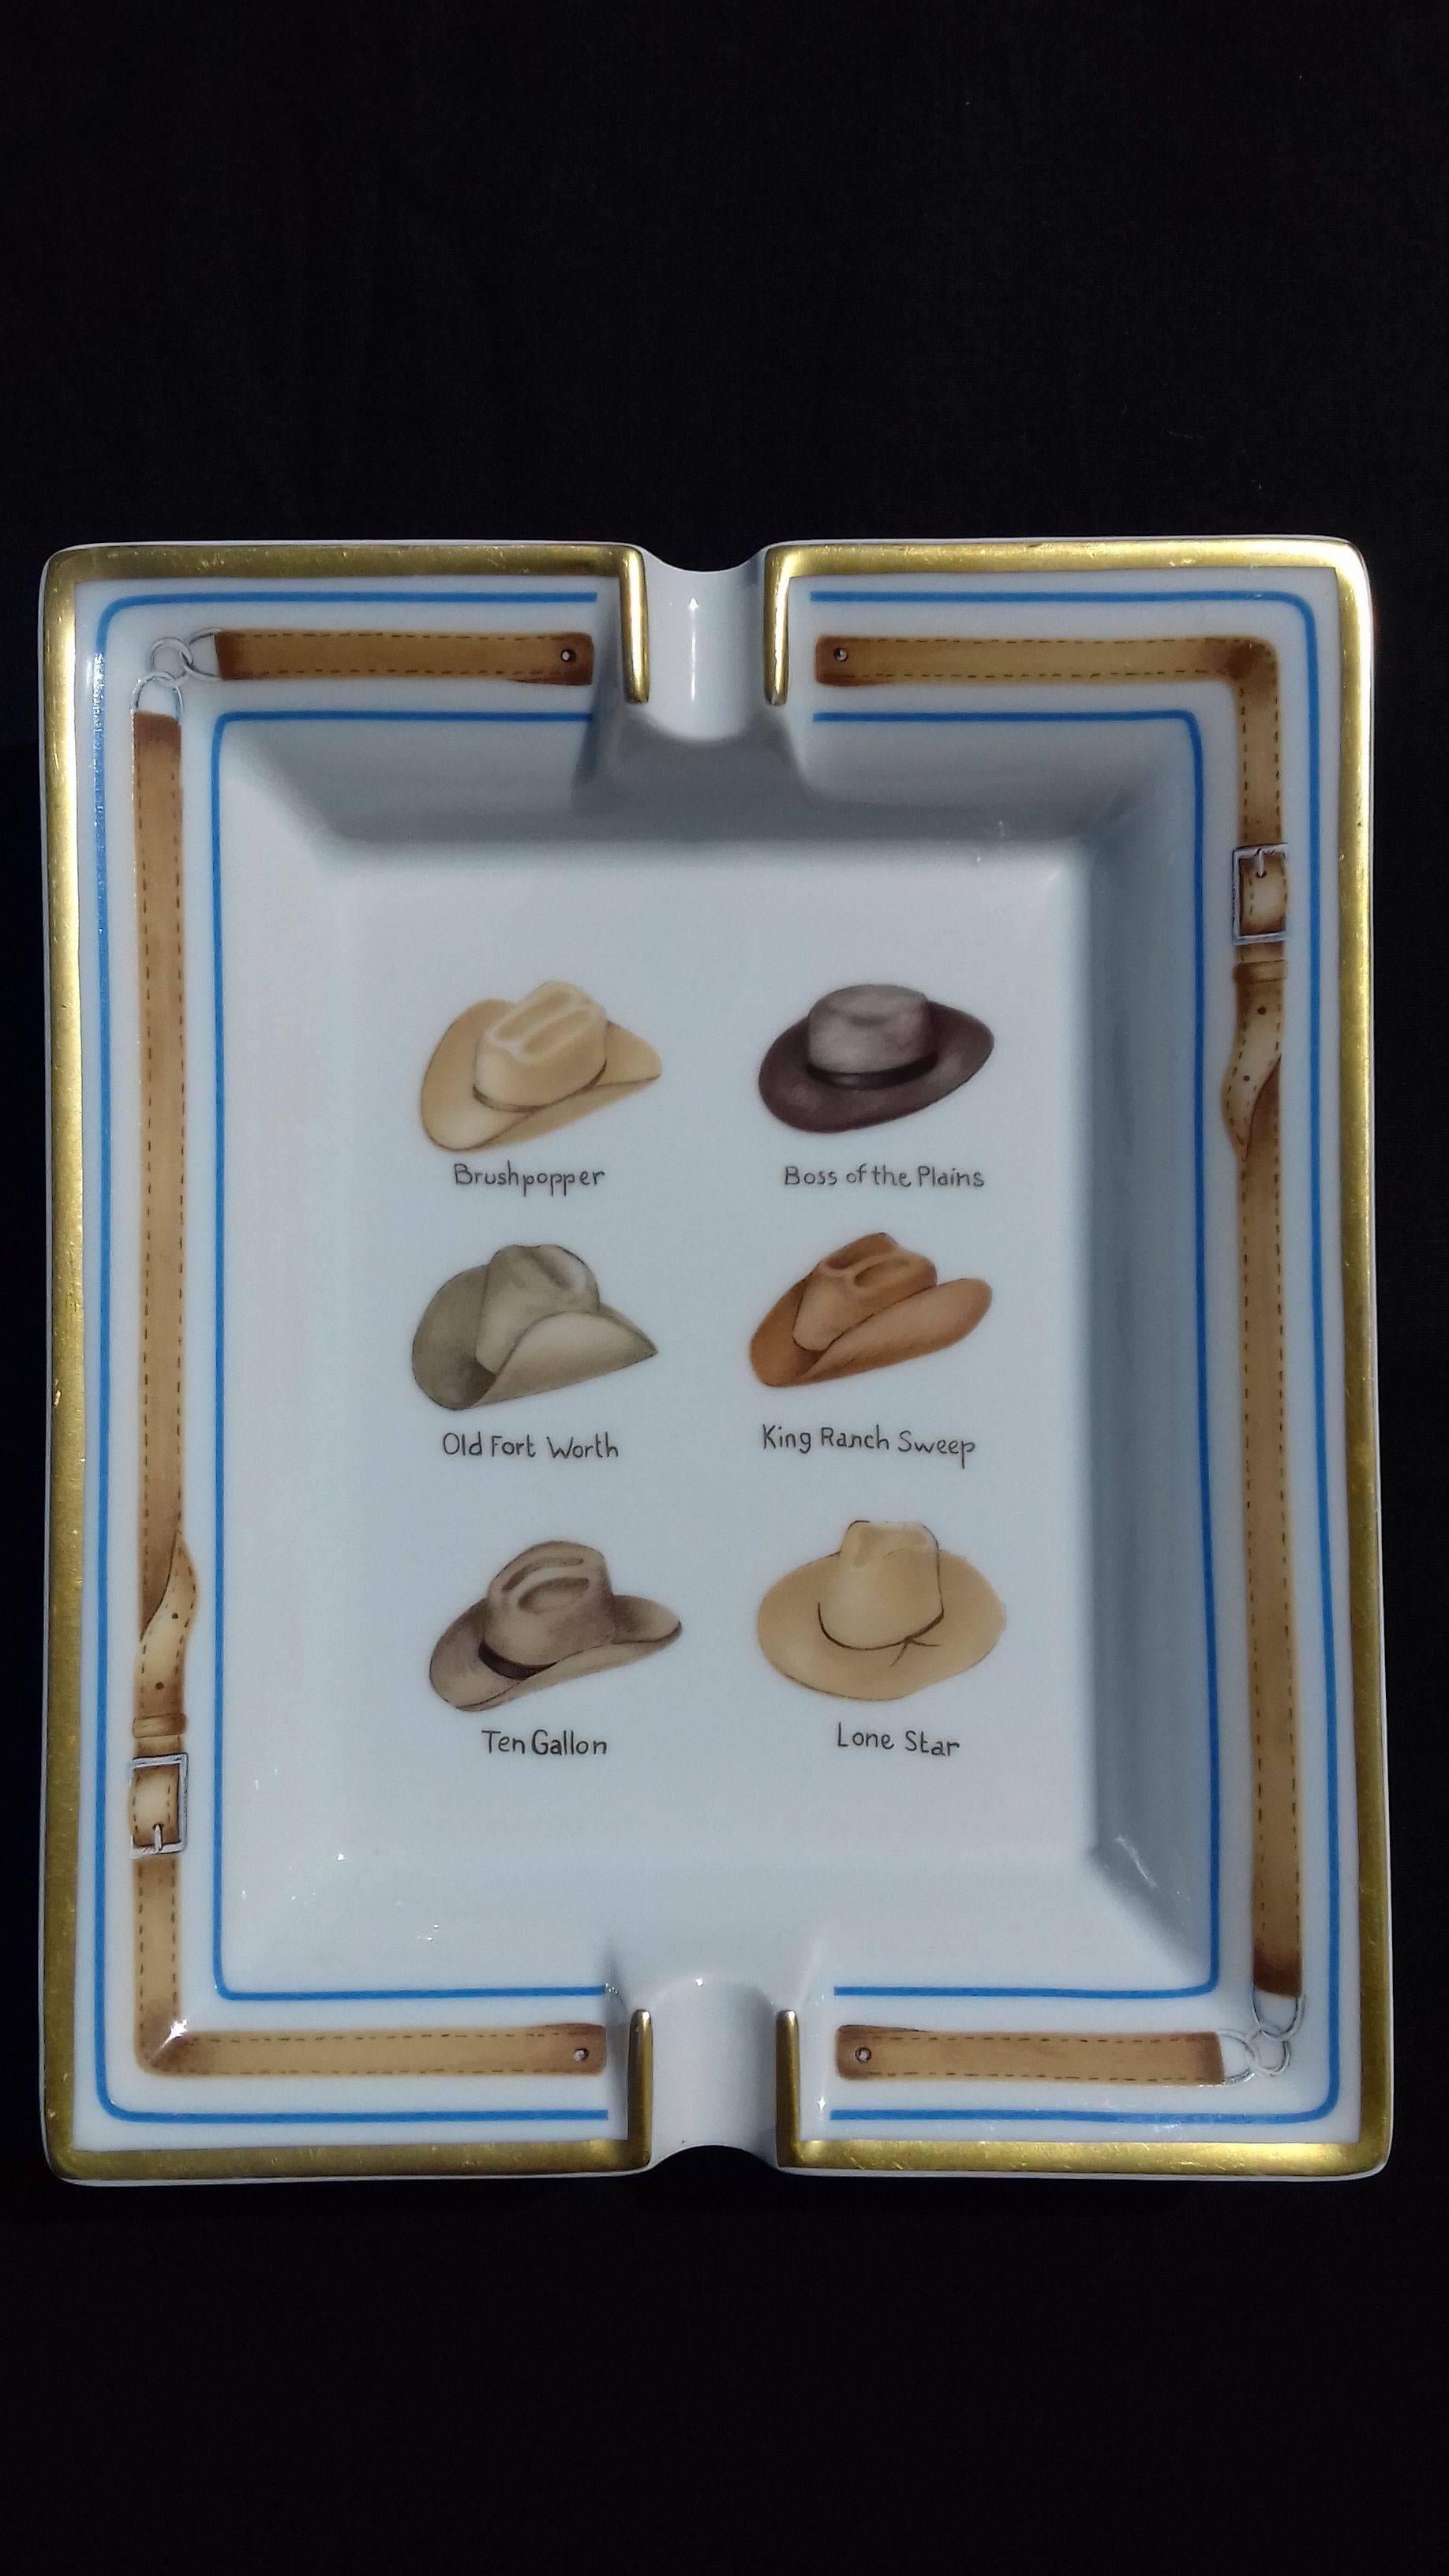 Gorgeous Authentic Hermes Ashtray

Pattern: Drawings of 6 cowboy hats (Brushpopper/Boss of the Plains/Old Fort Worth/Kind Ranch Sweep/Ten Gallon/Lone Star)

Made in France

Made of Printed Limoges Porcelain

Colorways: White Background, Brown and